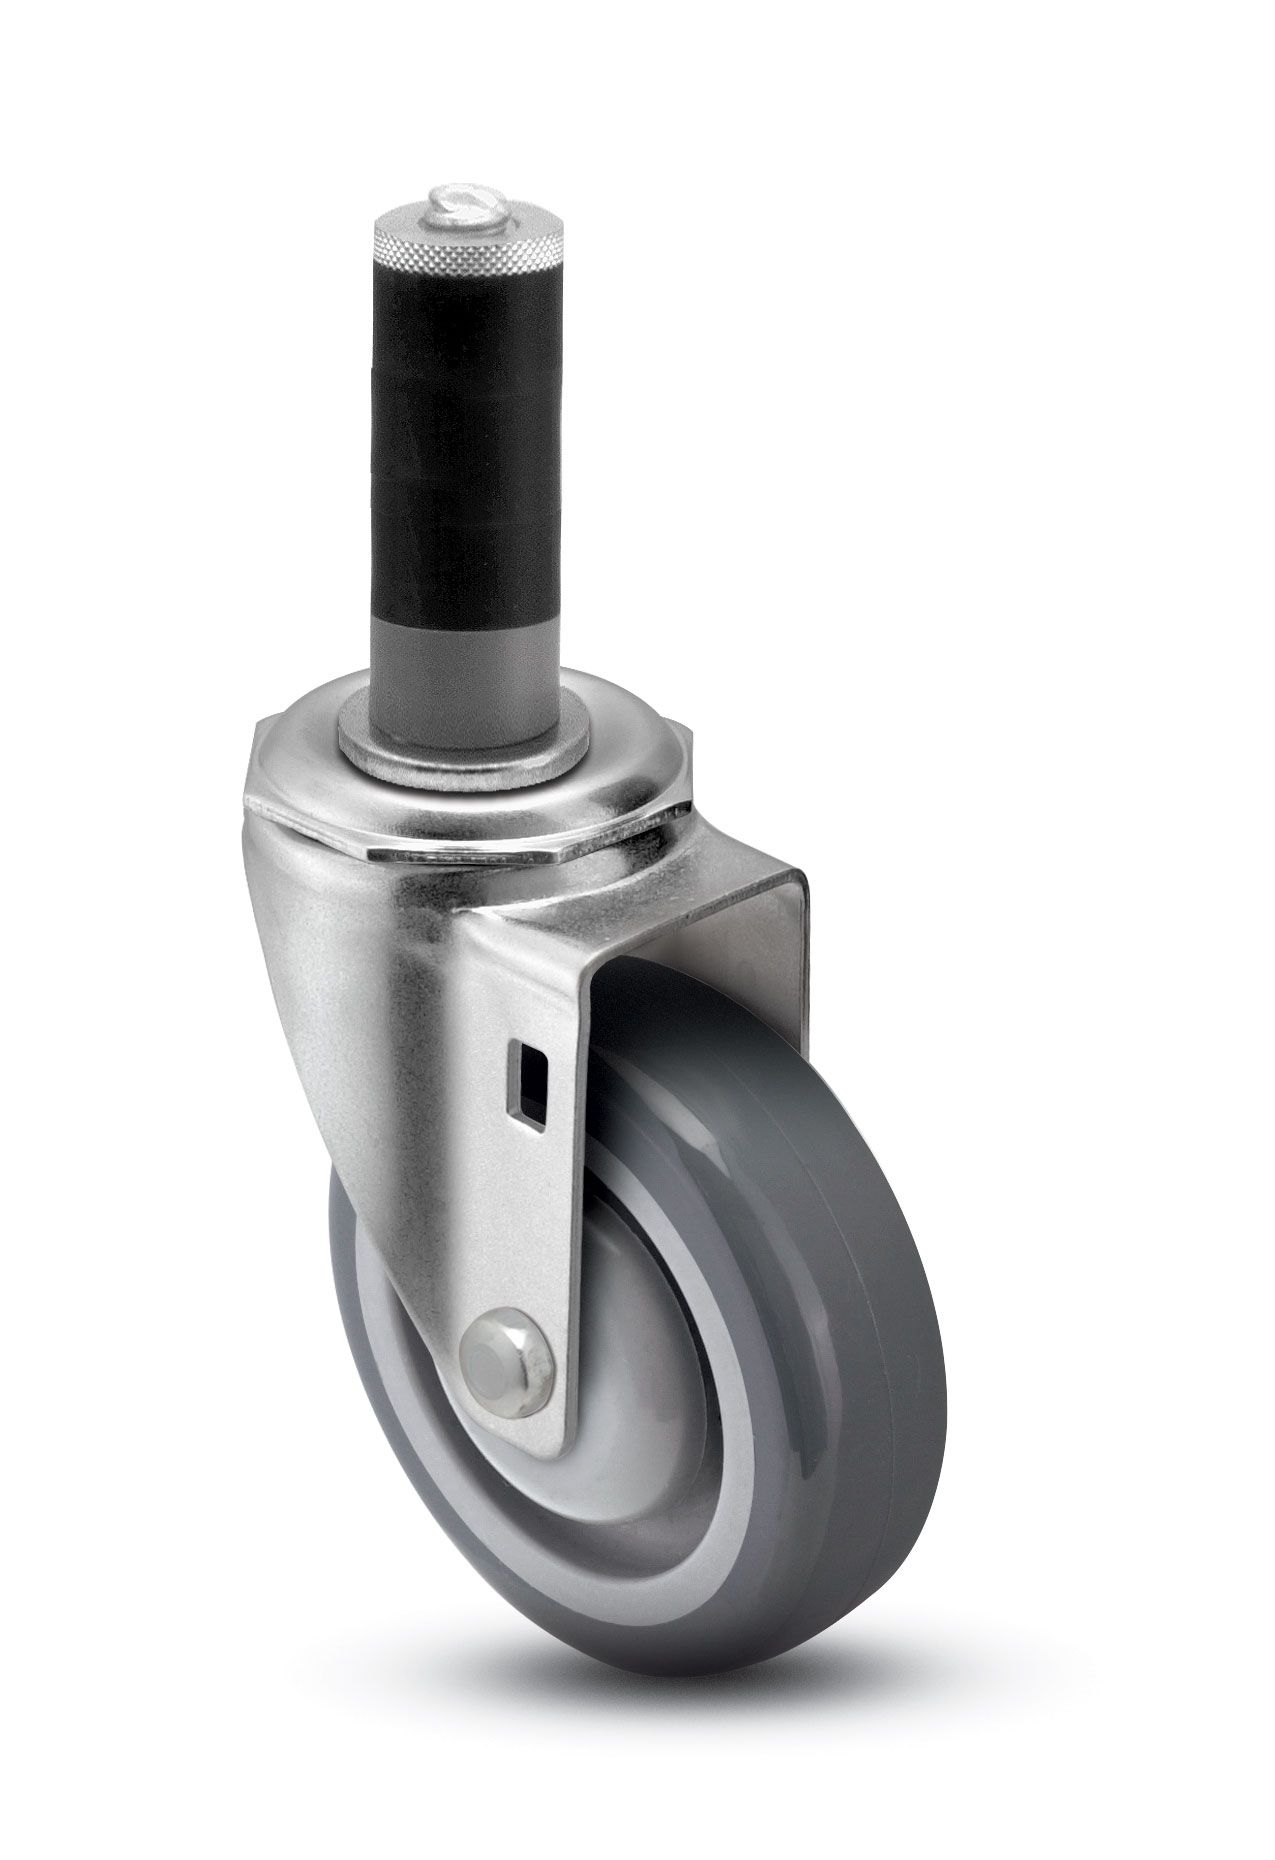 Caster; Swivel; 3" x 1-1/4"; PolyU on PolyO (Gray); Expandable Adapter (1" - 1-1/16" ID tubing); Prec Ball Brng; 250#; Dust Cover; Total Lock Brake (Item #64553)